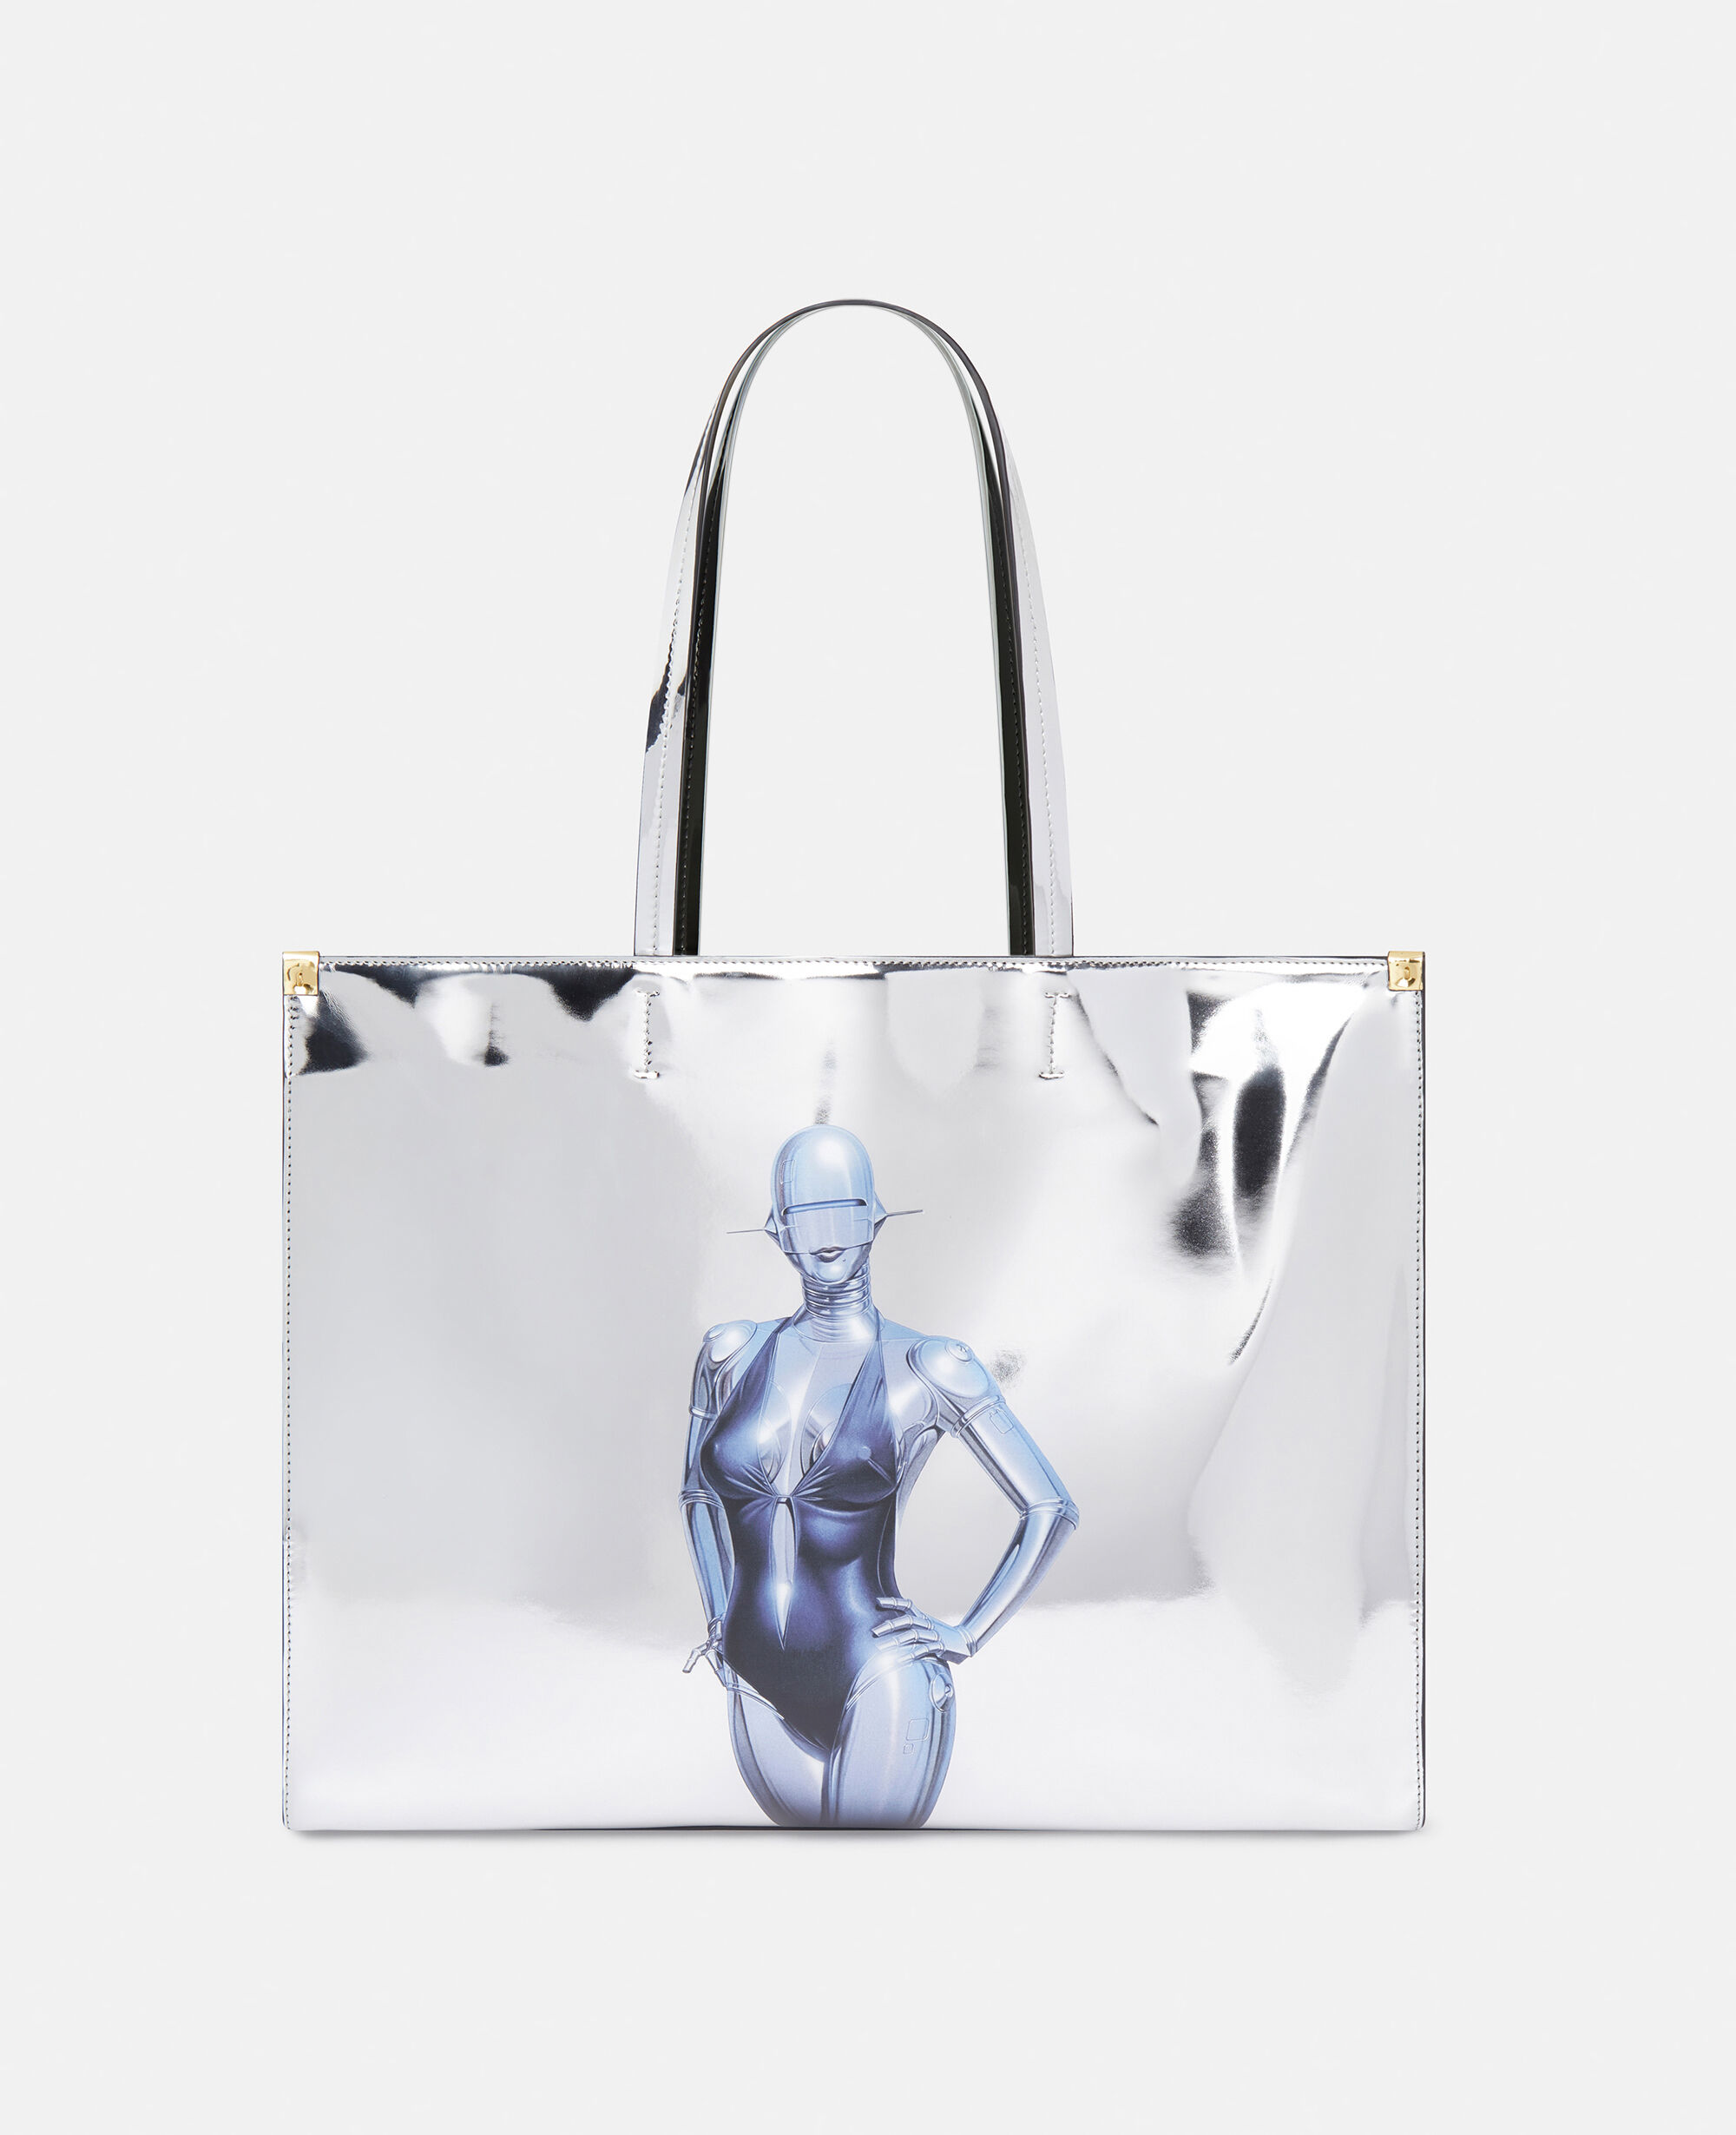 Prada's Limited Edition Robot Bags Capsule Collection - BagAddicts Anonymous